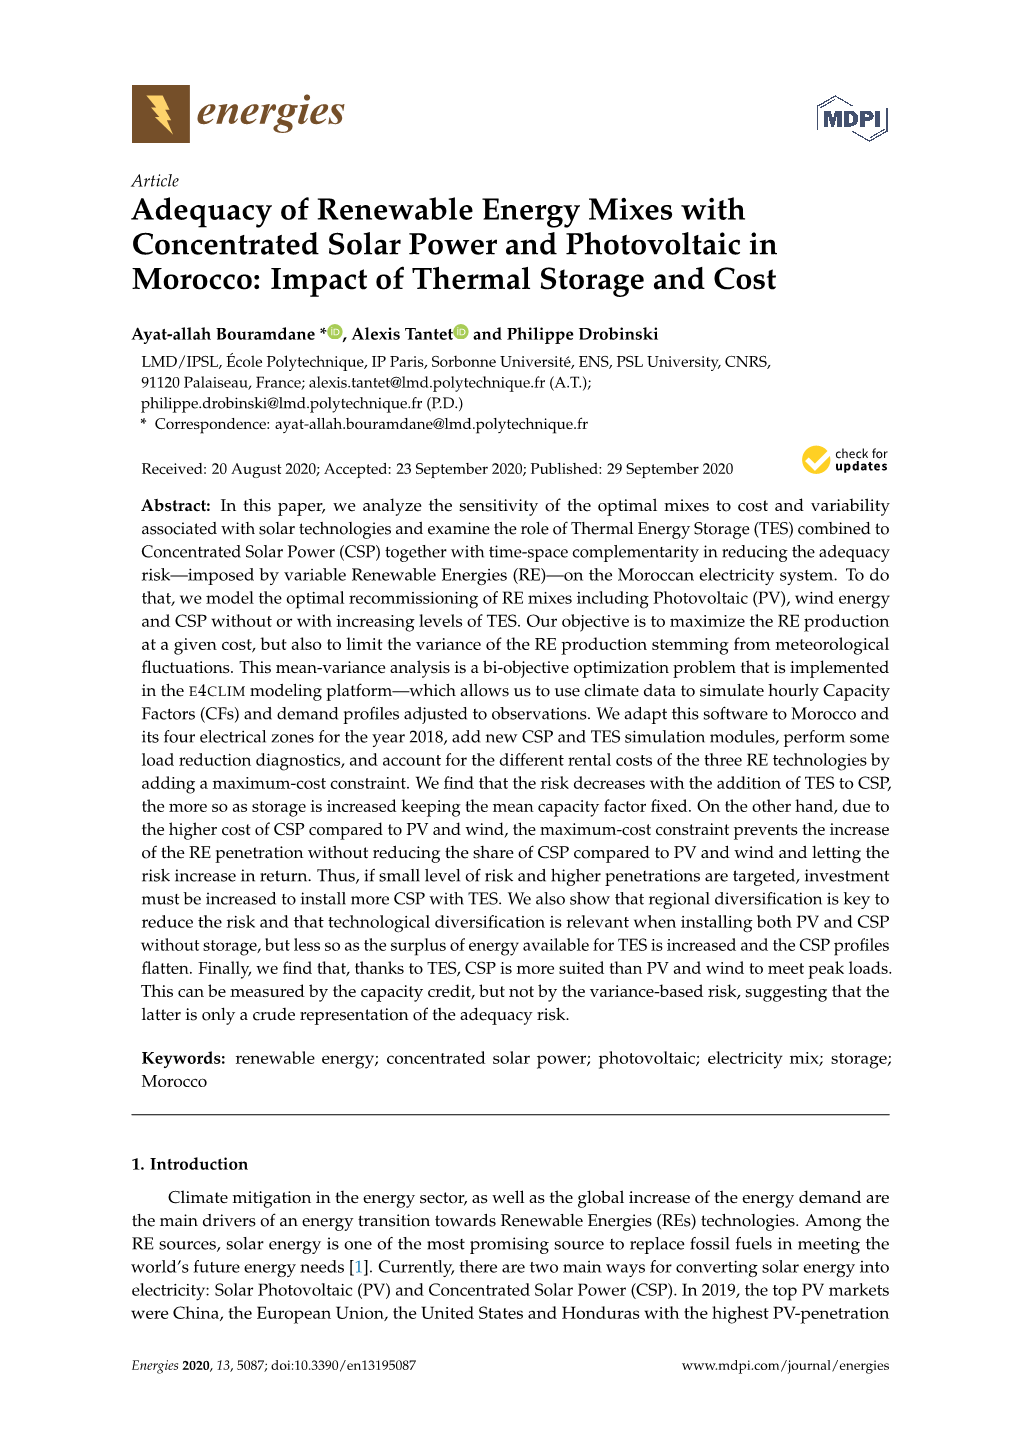 Adequacy of Renewable Energy Mixes with Concentrated Solar Power and Photovoltaic in Morocco: Impact of Thermal Storage and Cost